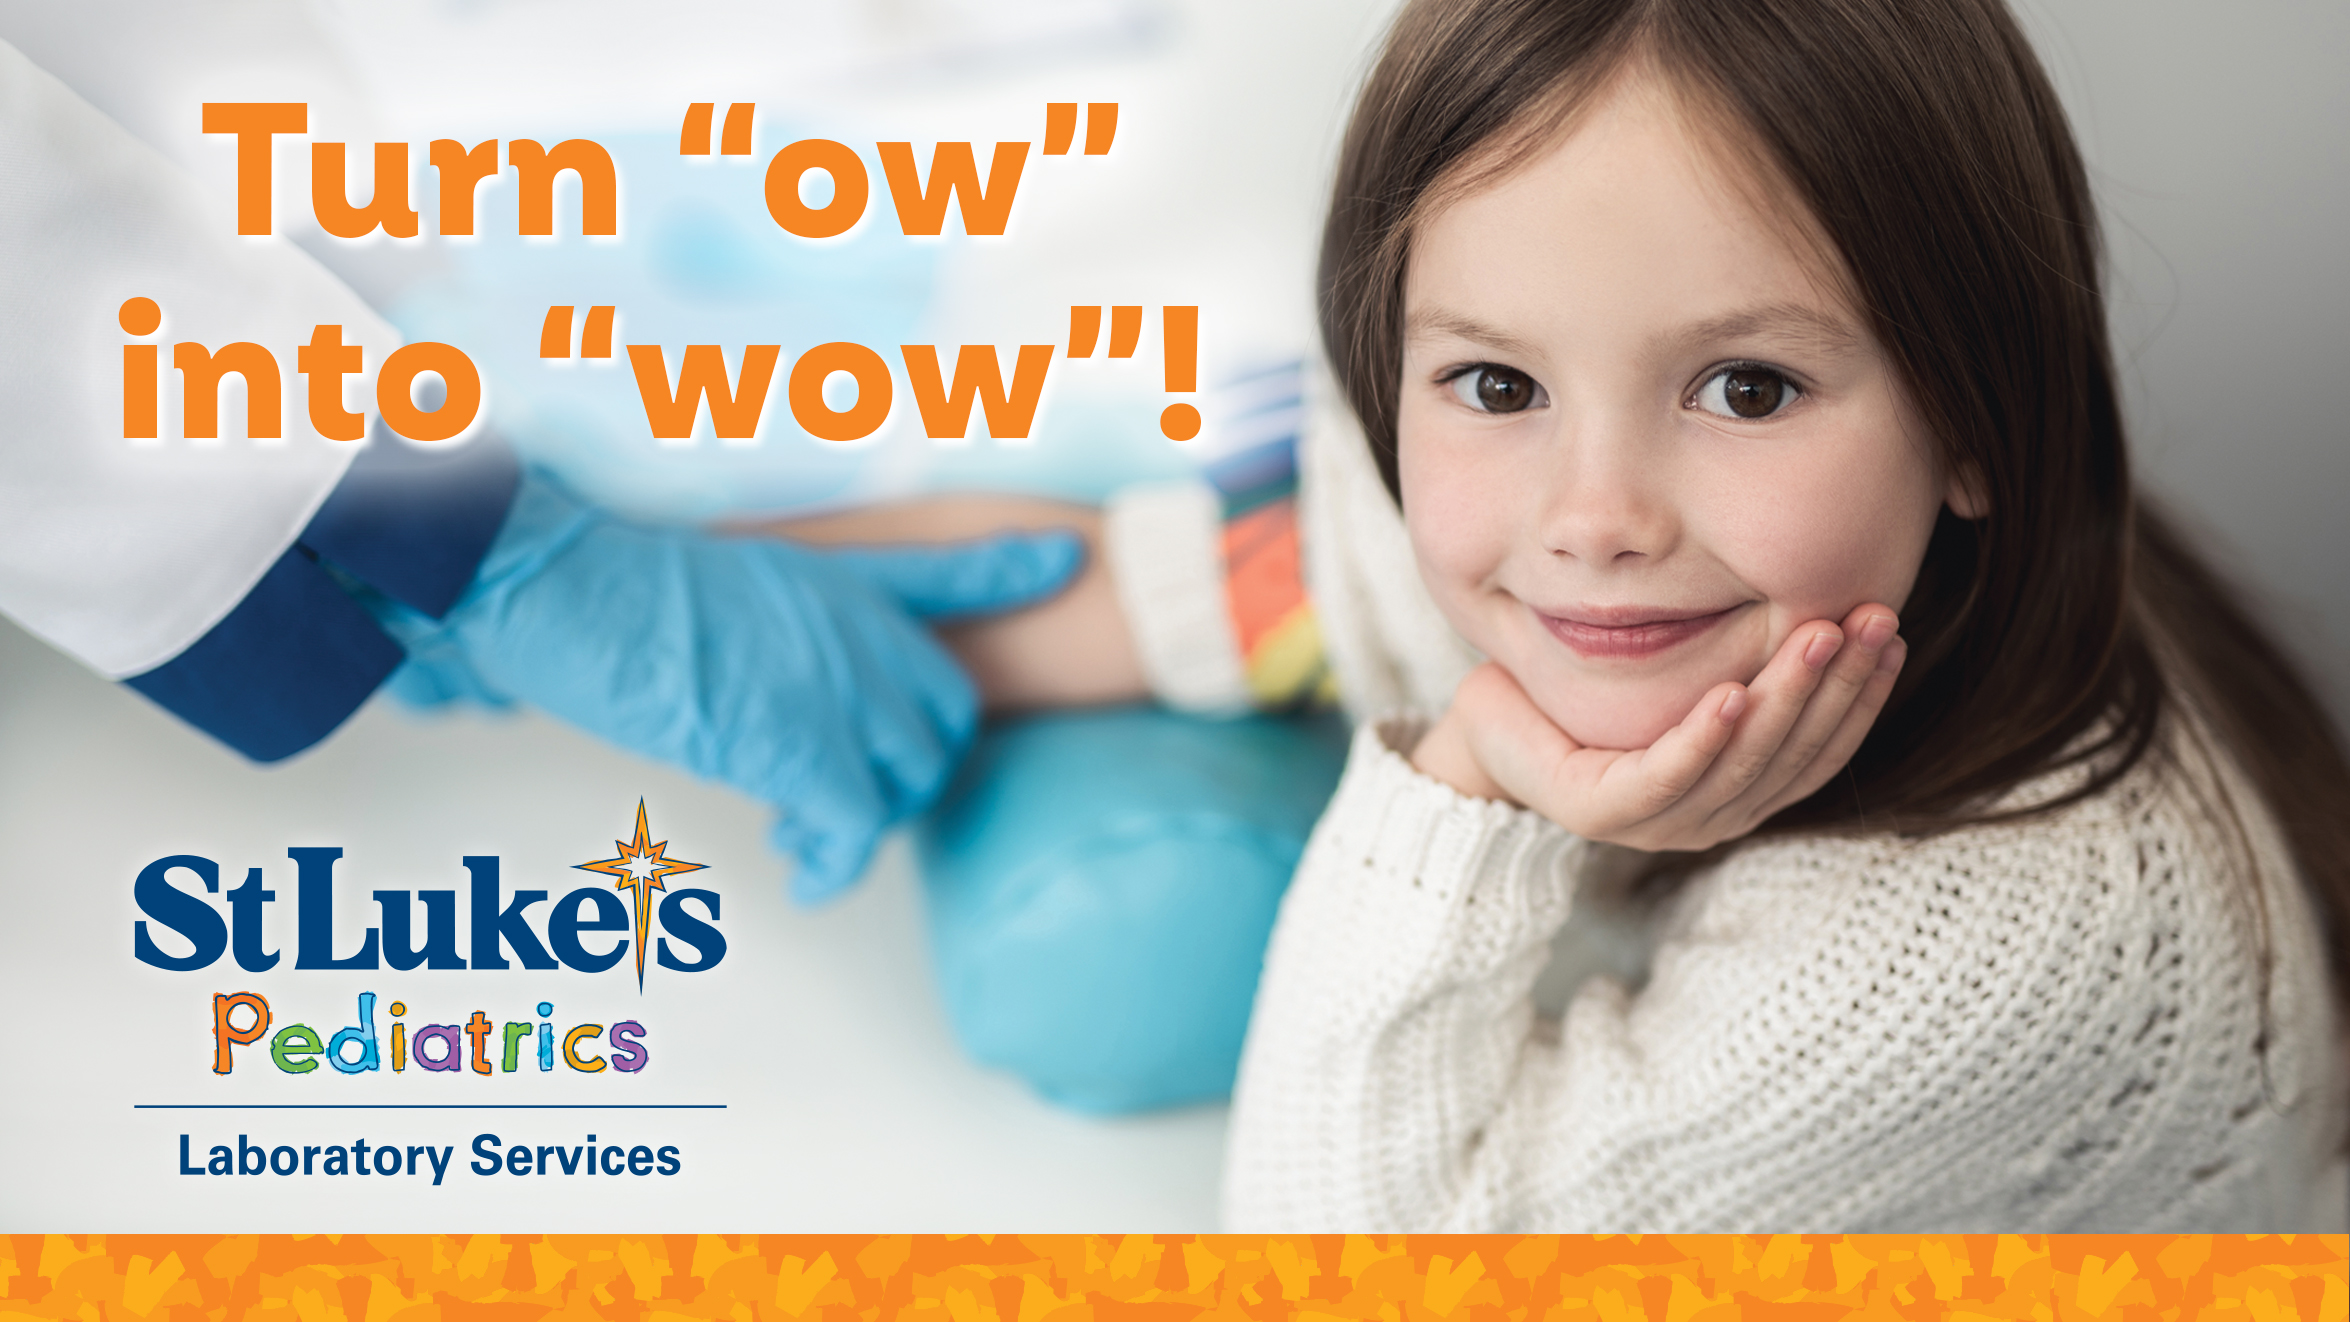 Turn "ow" into "wow"!